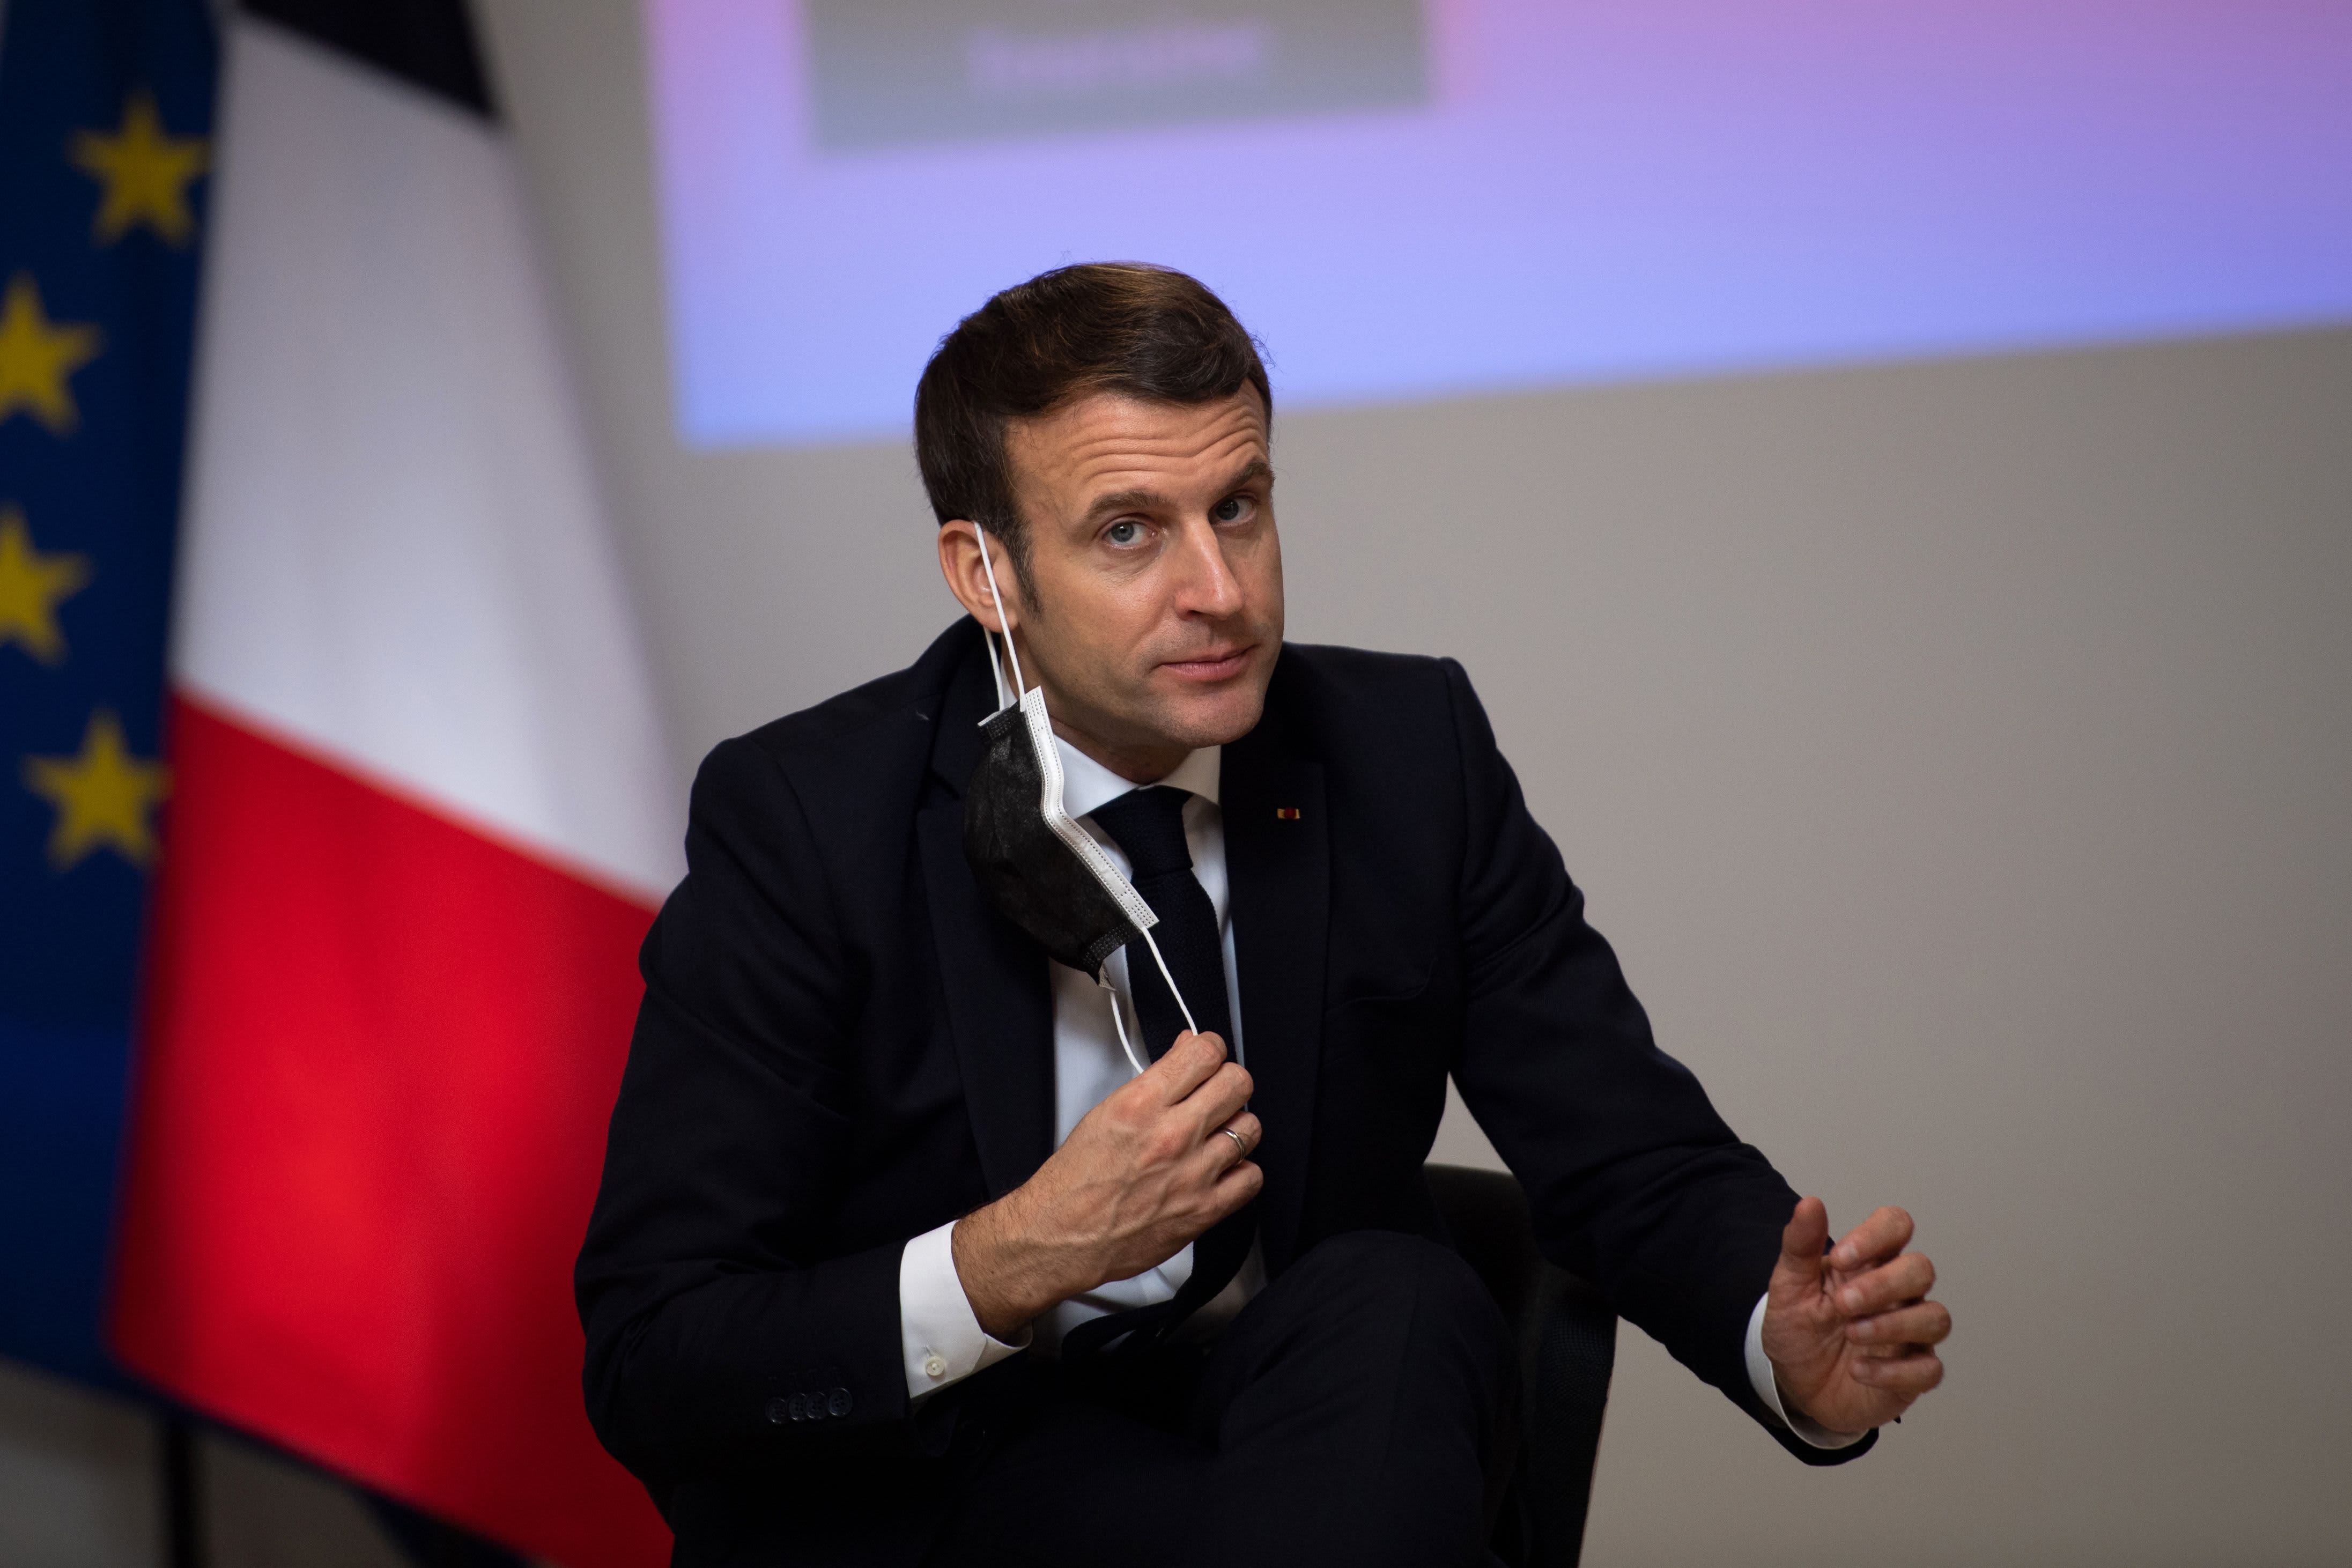 The launch could wipe out Macron’s chances of re-election